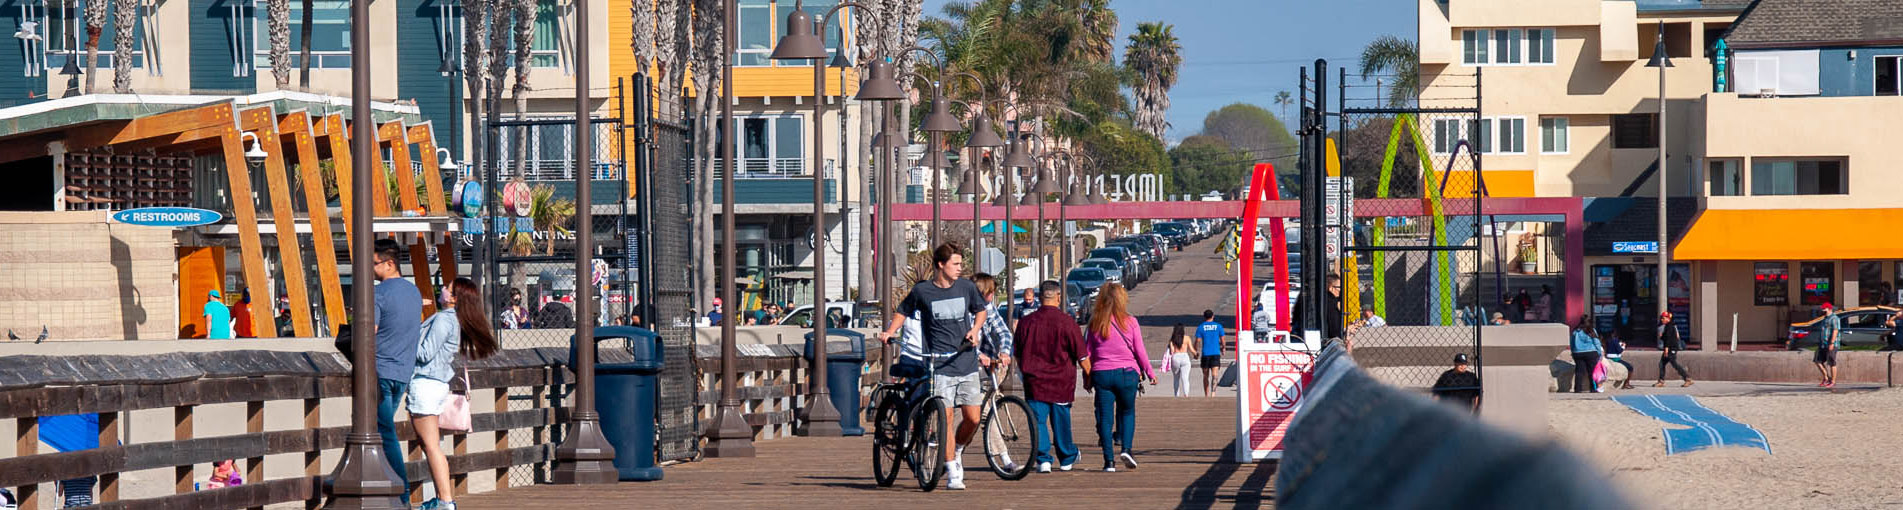 Imperial Beach Pier and Businesses